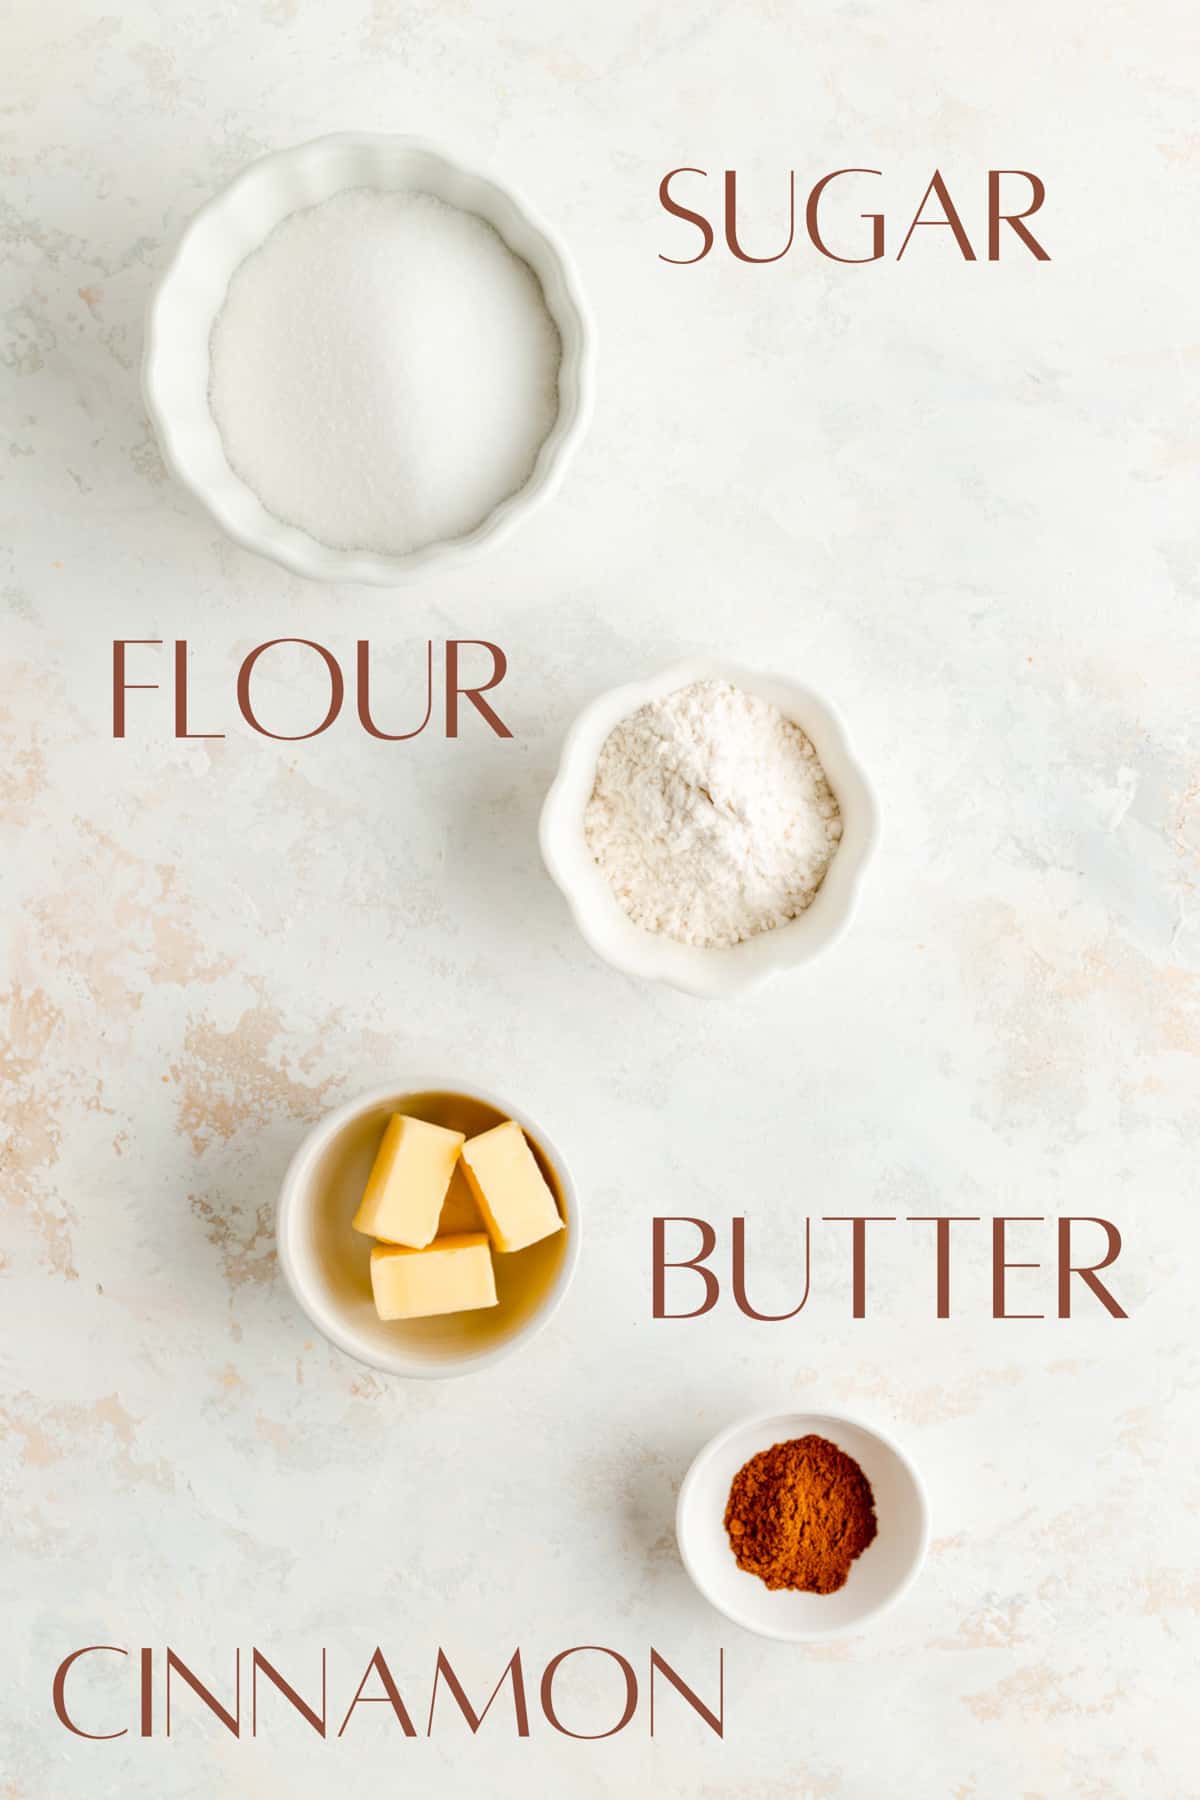 sugar, flour, butter, and cinnamon in individual bowls.